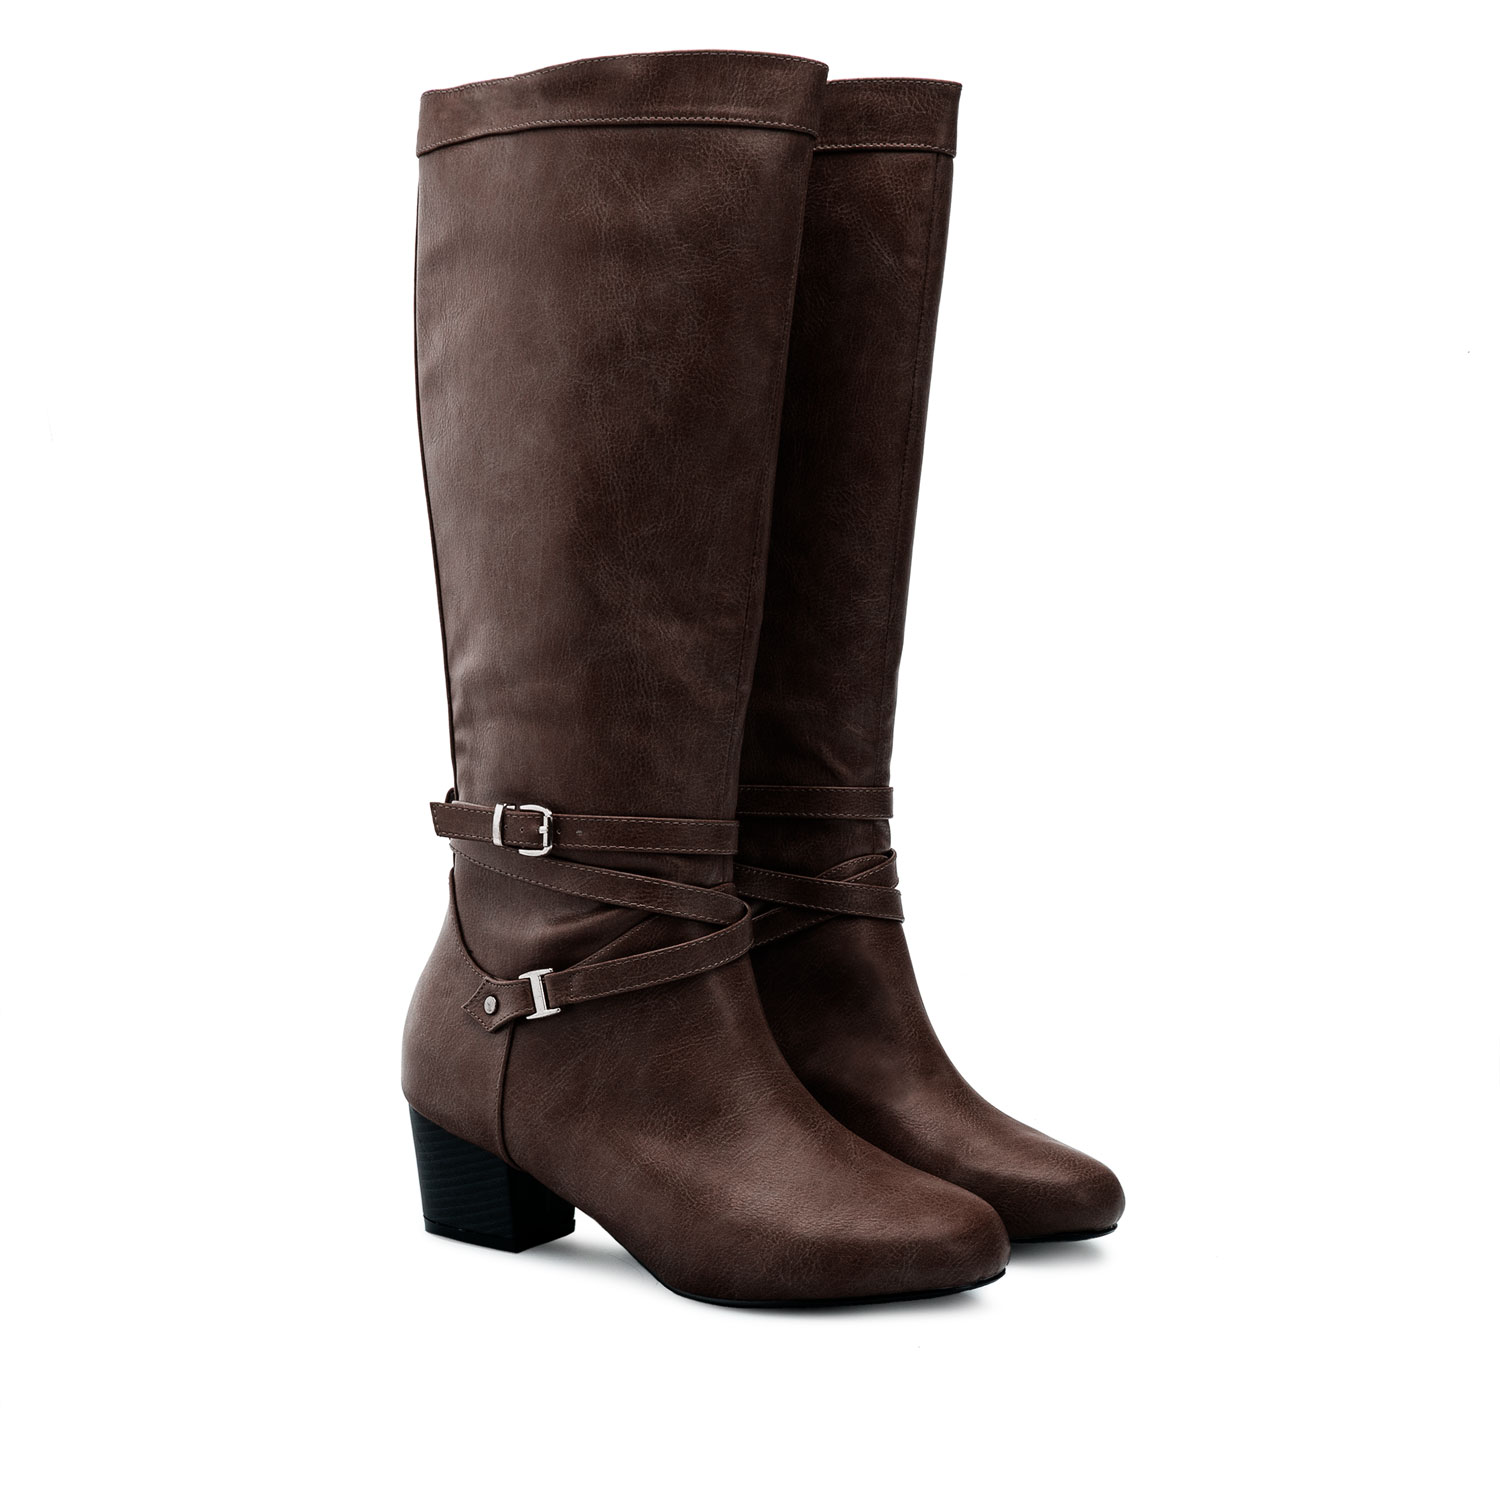 2-Buckled Boots in Brown Faux Leather 